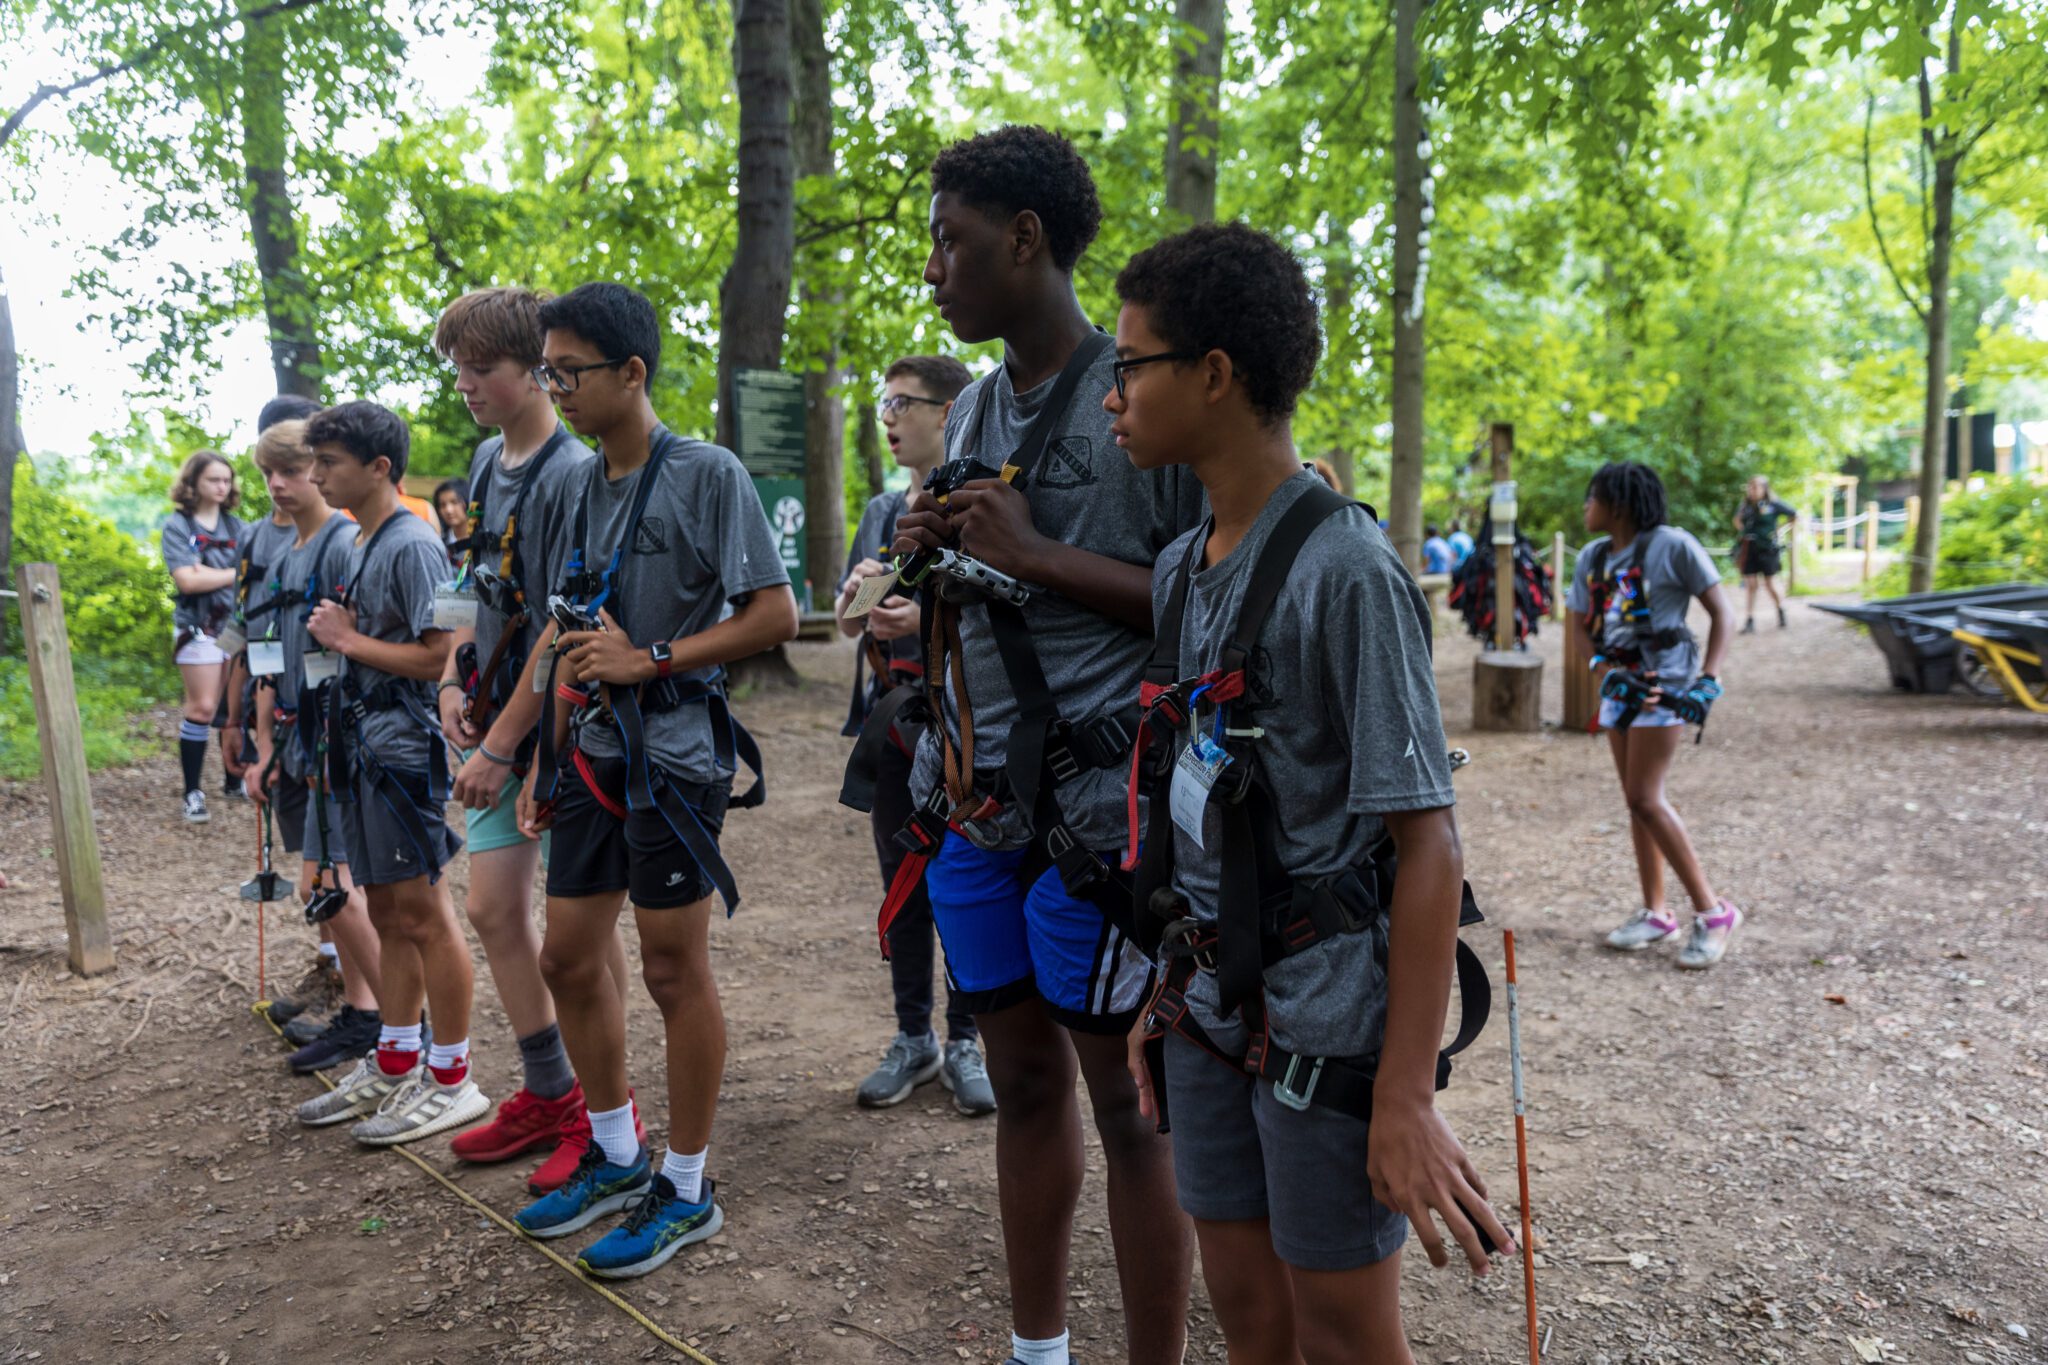 A group of young people participating in the P.L.E.D.G.E. Leadership Program standing in a wooded area.